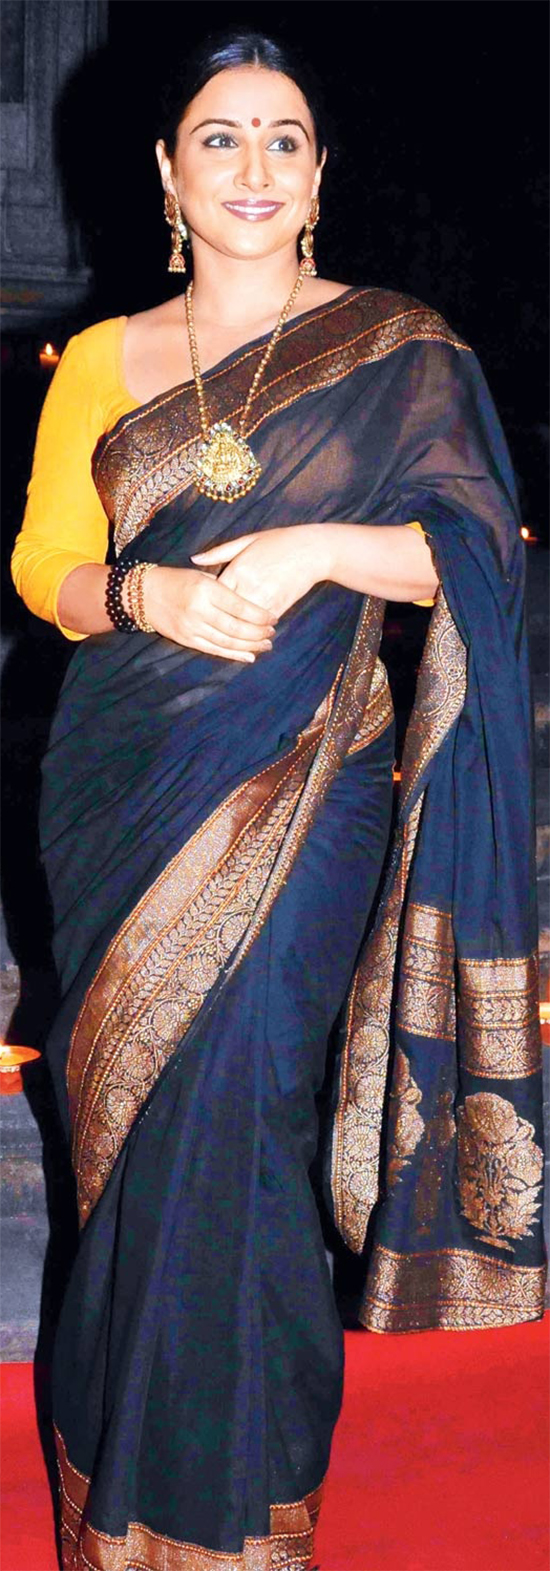 Vidya Balan Traditional Look Images In Sarees Just Ethnic She's known for looking hot in sarees while she also feels easy and comfortable in saree. girlicious beauty